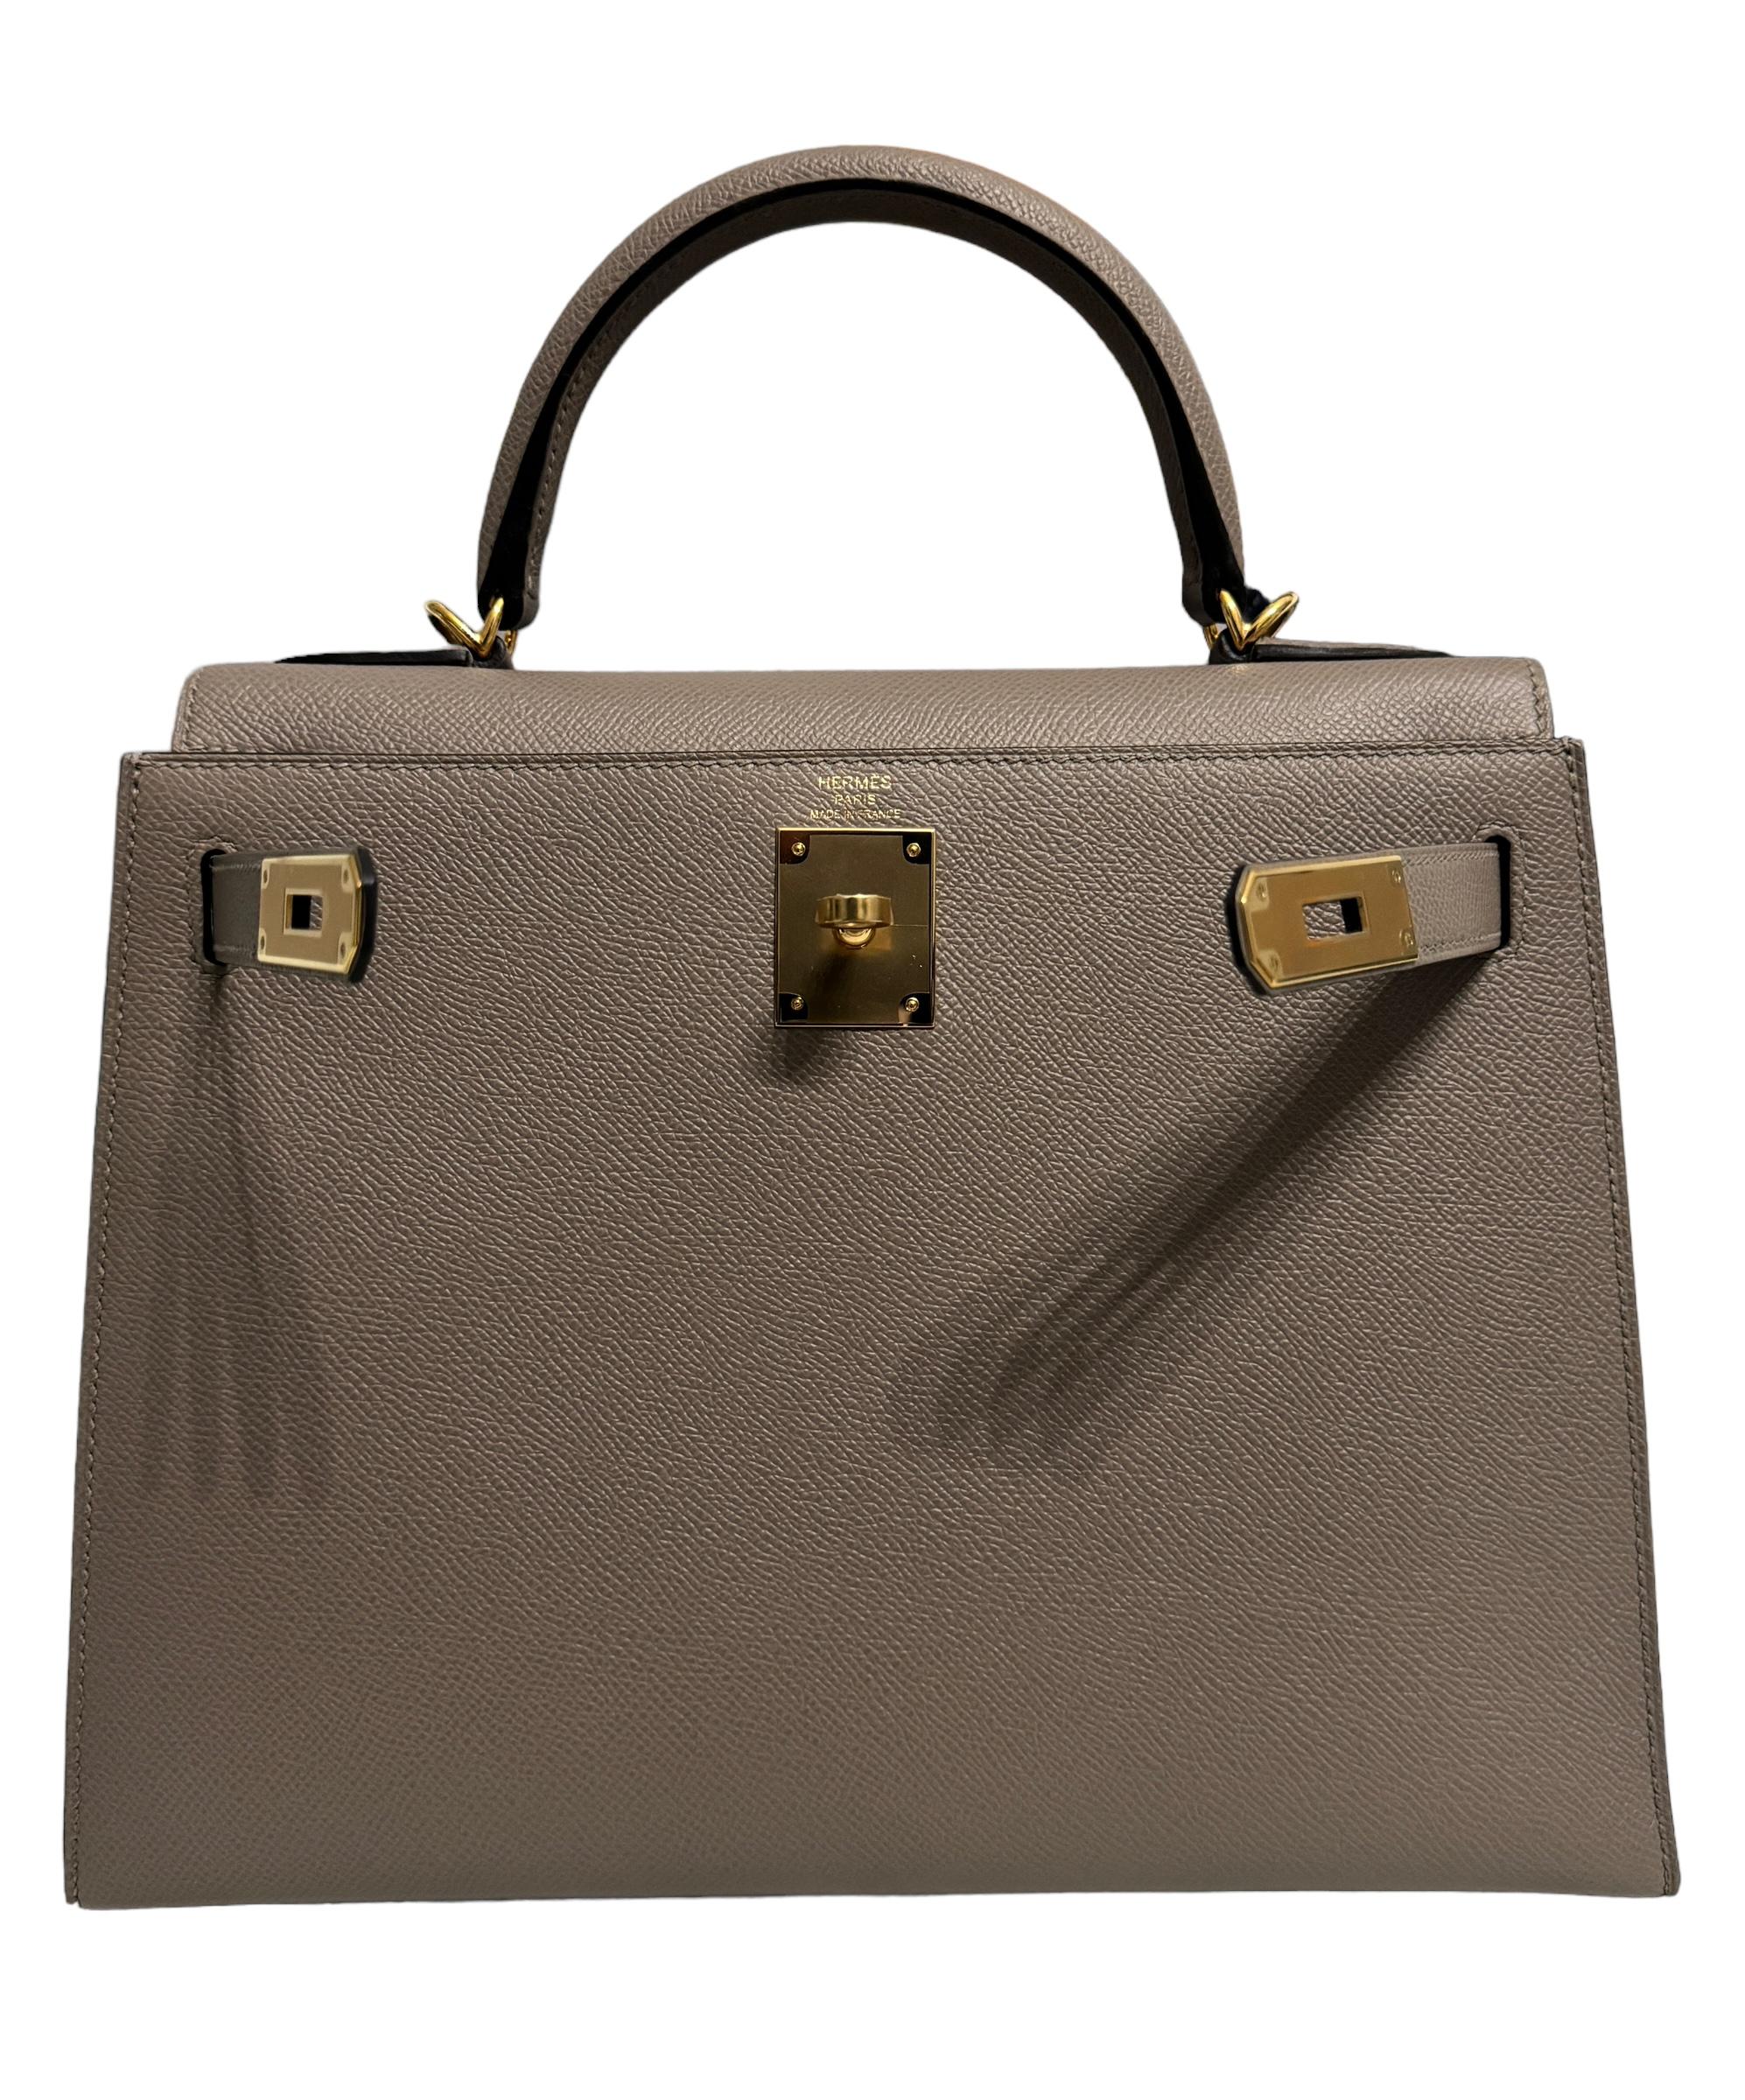 Absolutely Stunning Rare and Most Coveted As New GRAIL Hermes Kelly 28 Sellier Gris Asphalt Epsom Leather complimented by Gold Hardware. As New with Plastic on all hardware and feet. 2021 Z Stamp. 

Please see last photo. Bag may have very minor